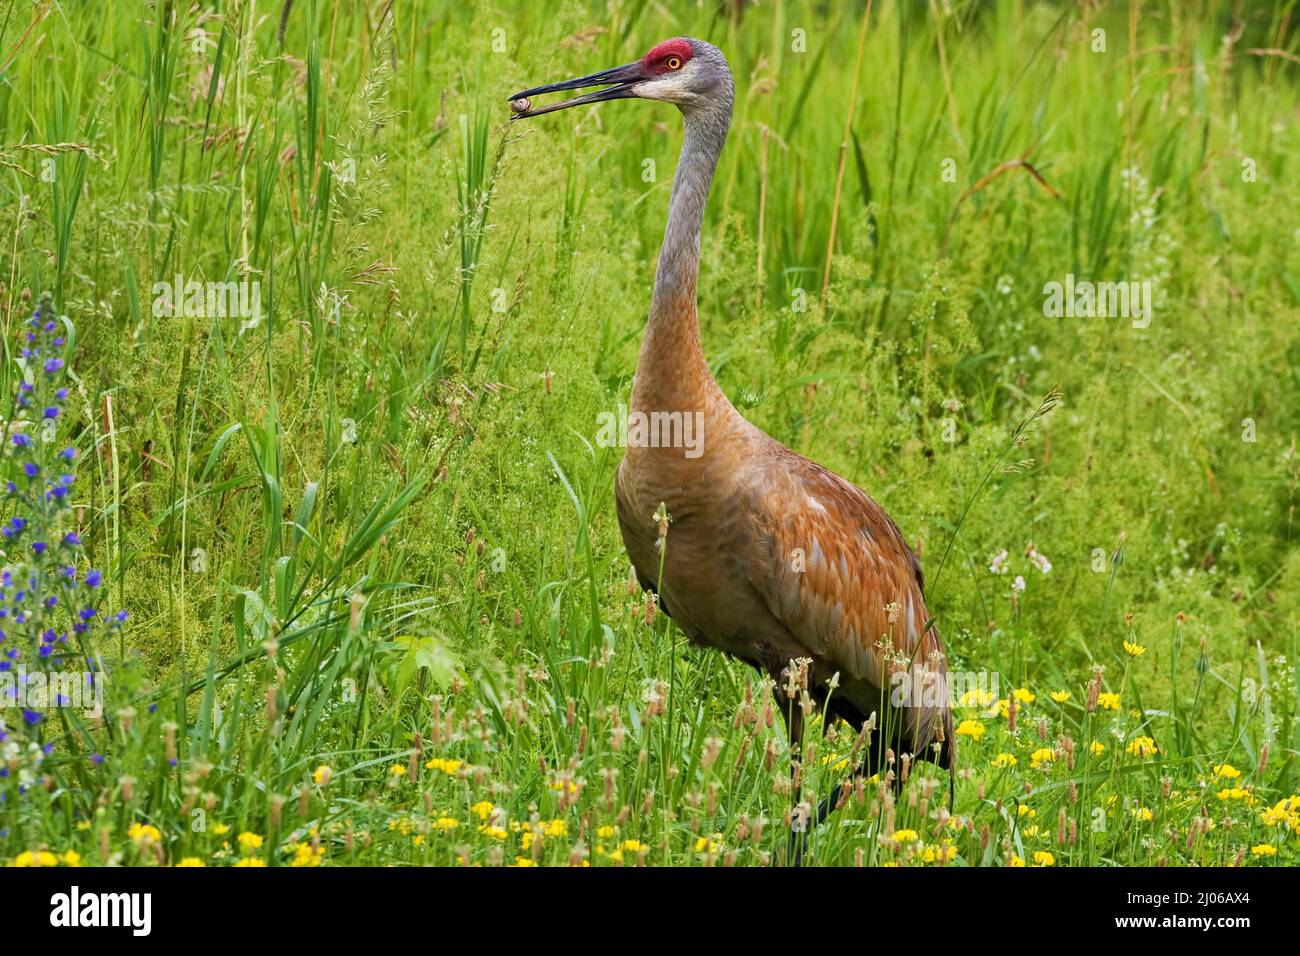 An Adult Sandhill Crane, Grus canadensis, feeding in meadow Stock Photo